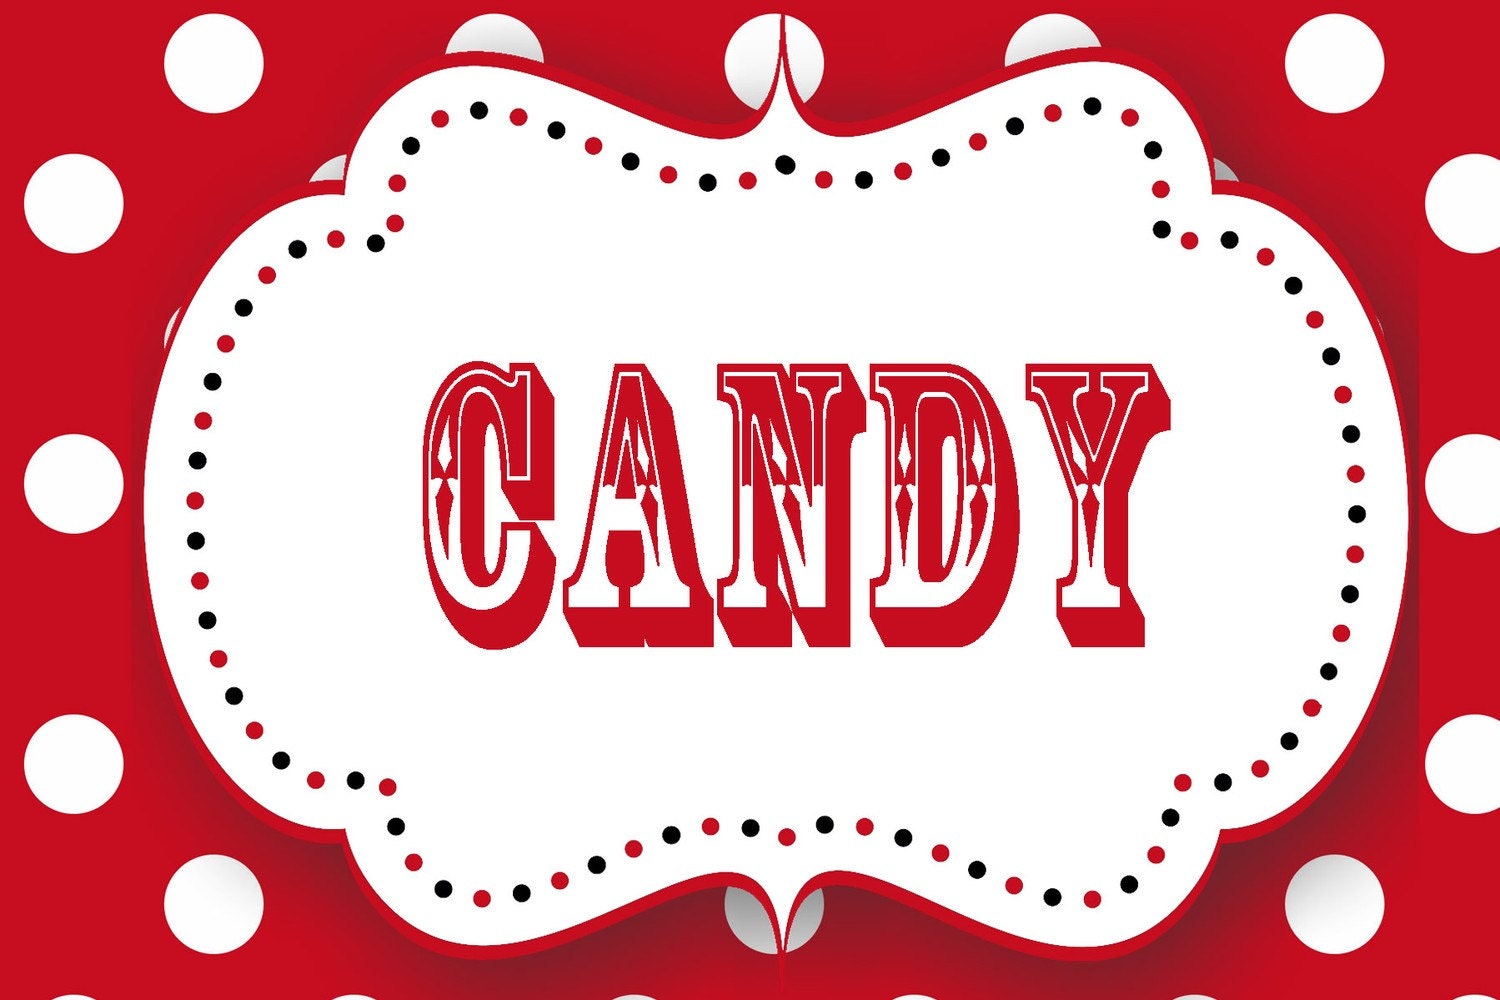 Red, White, Blue Candy Buffet/Candy Bar Sign 8x10 Print Your Own